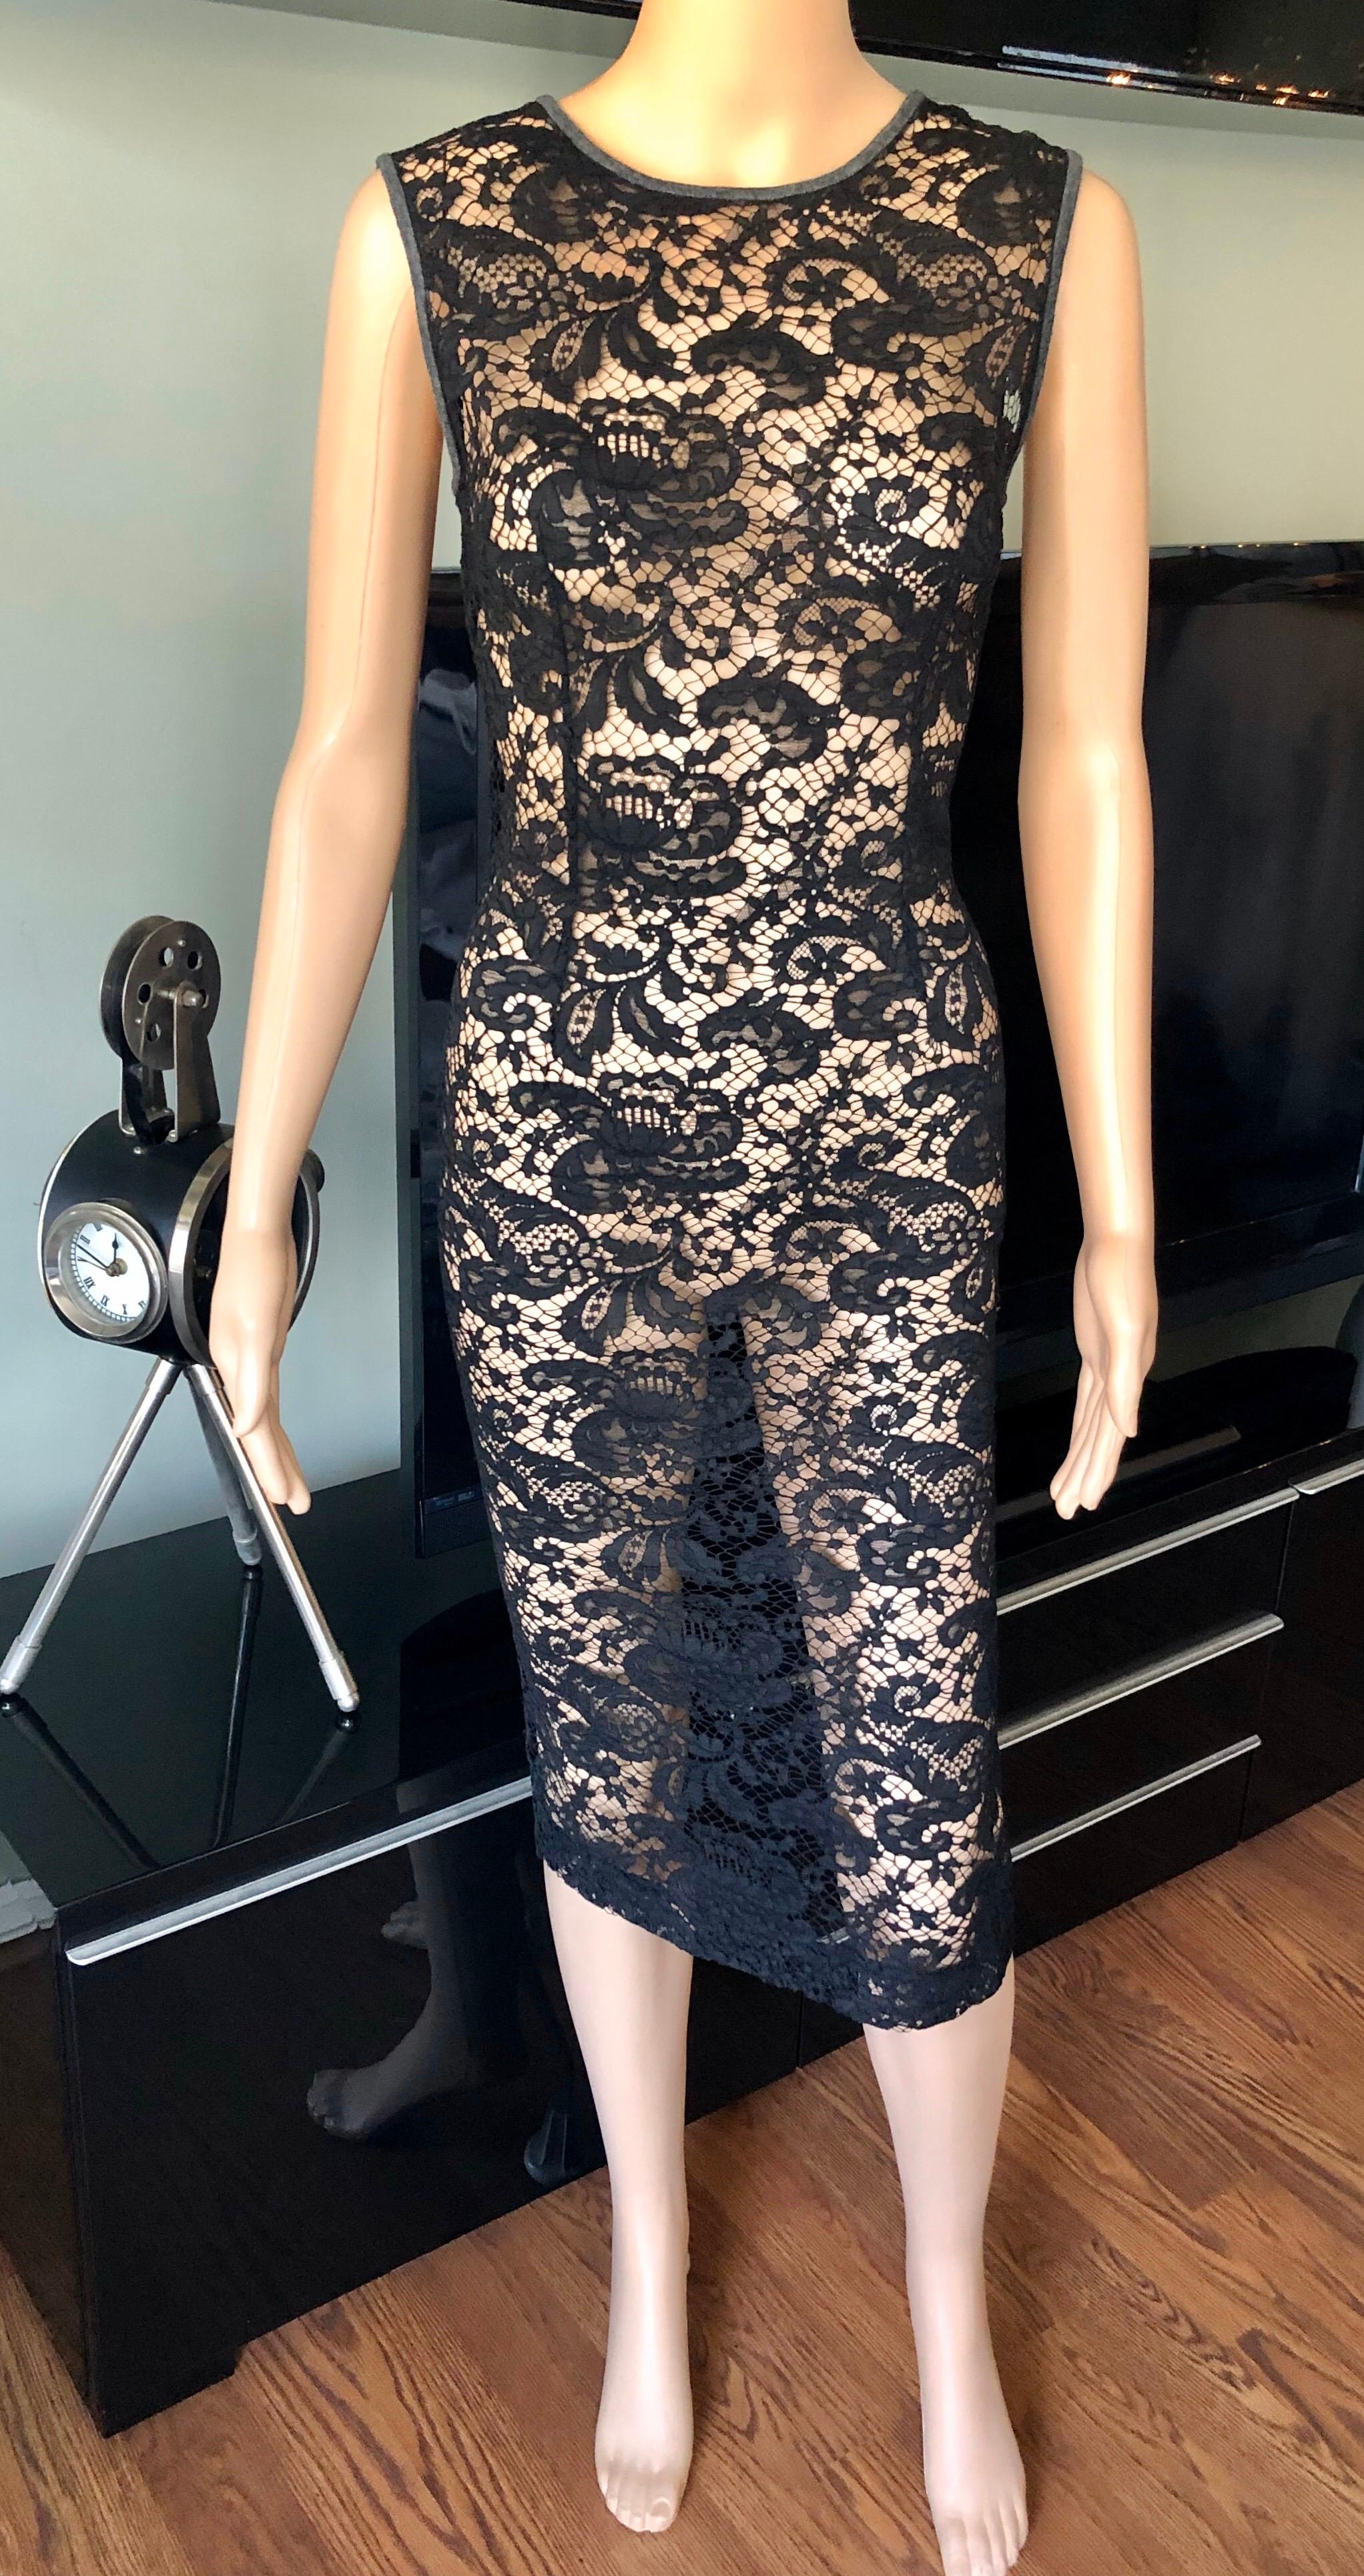 Dolce & Gabbana sheer lace midi dress with crew neck, floral lace throughout and concealed zip closure at back. Please note the size tag has been removed. Please find below the approximate measurements:
Chest: 16-18